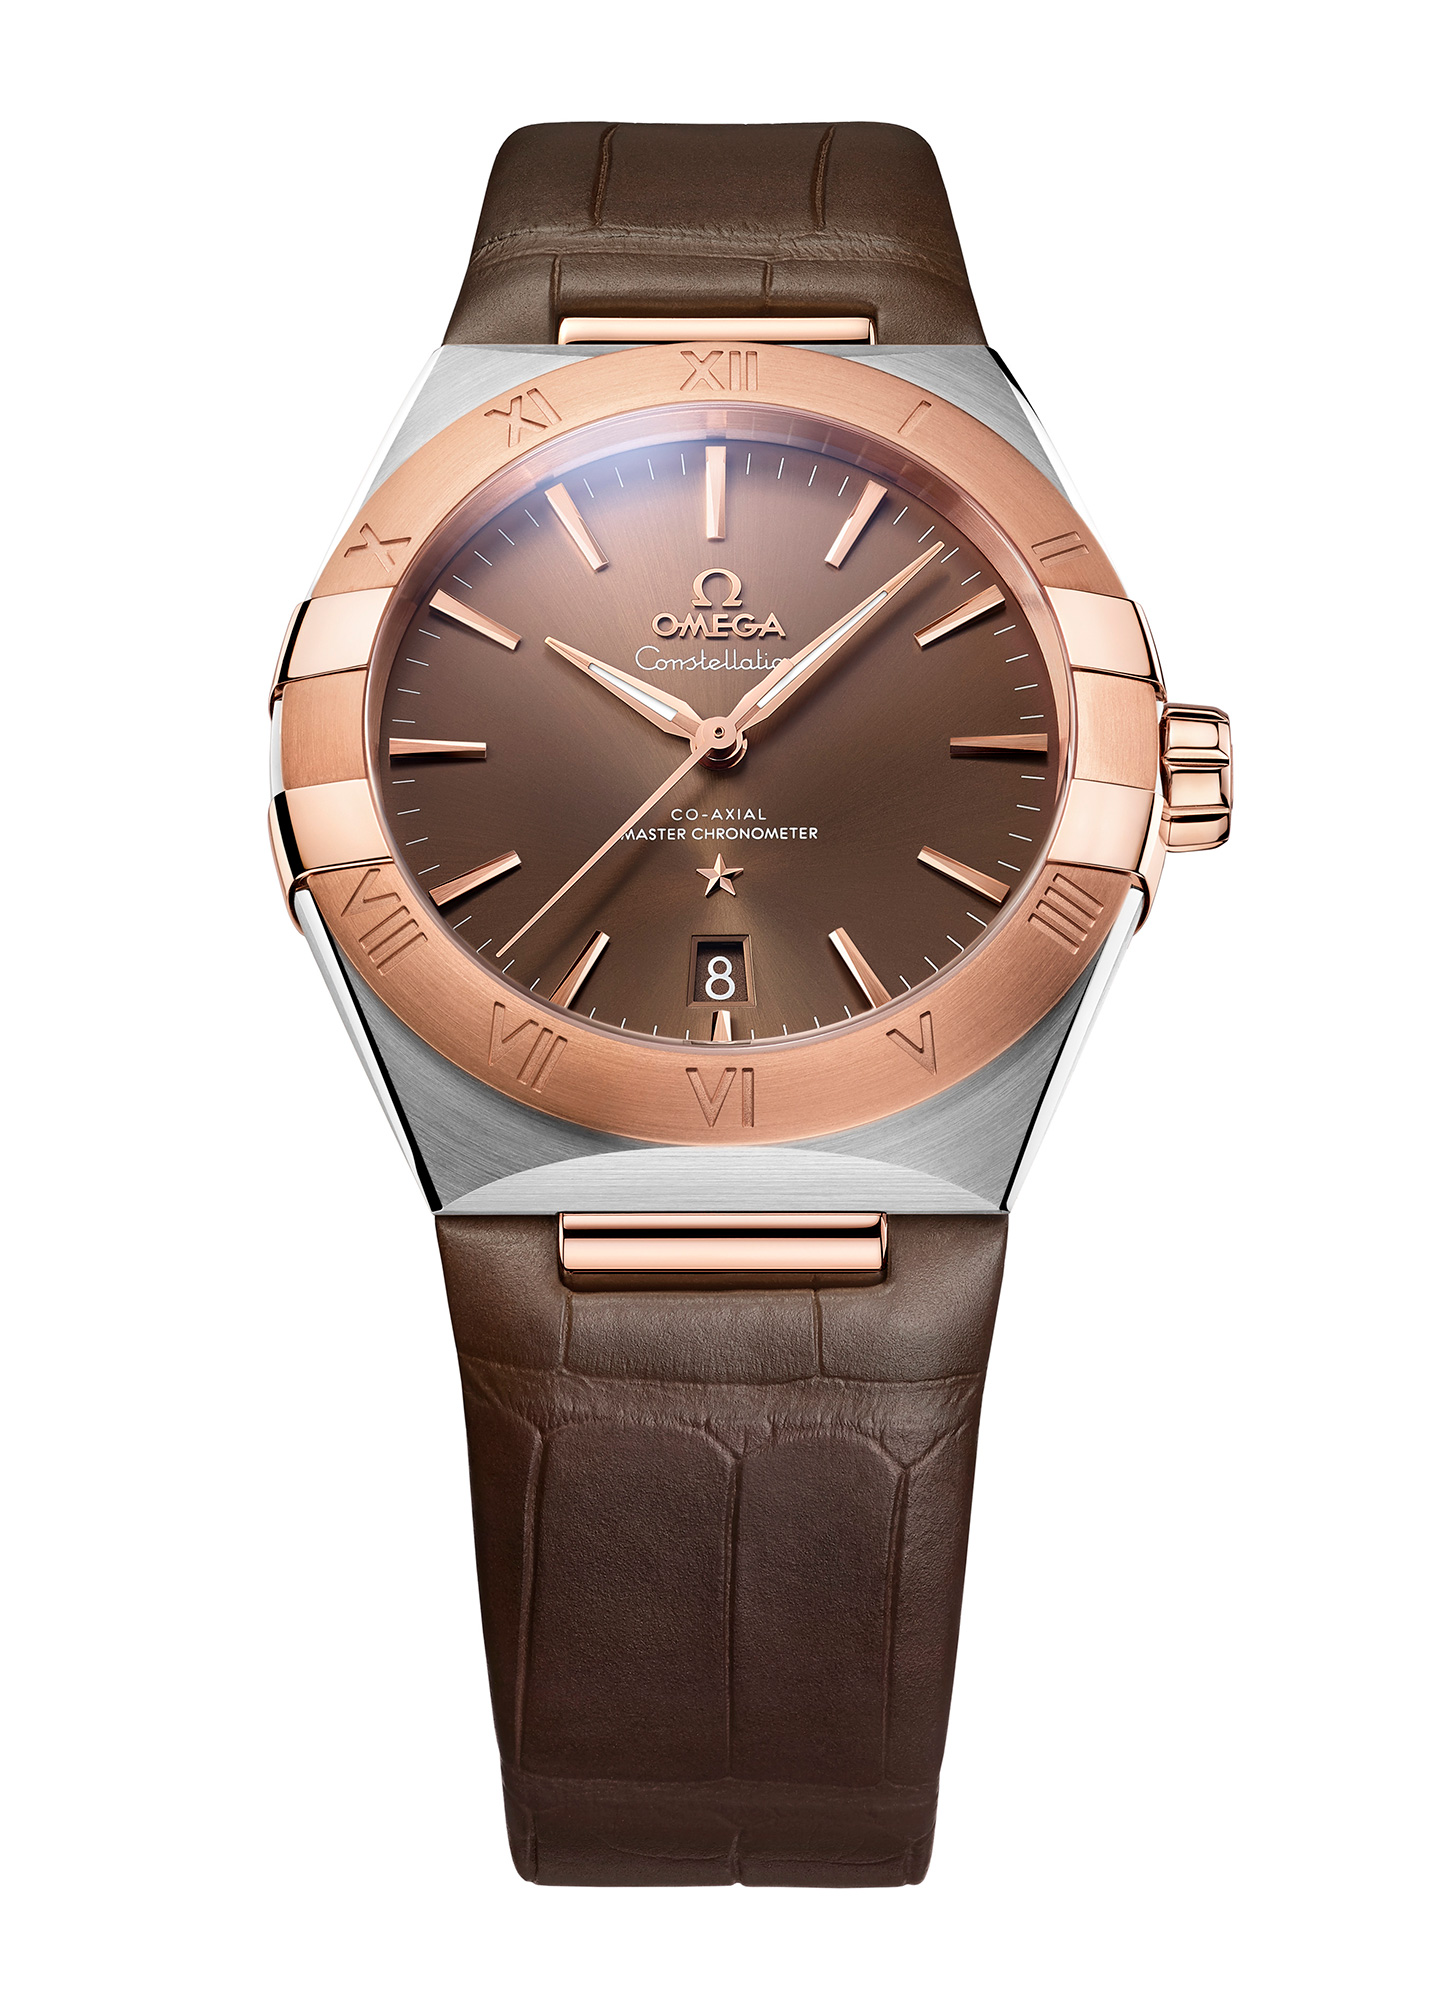 Omega watches, Omega Constellation